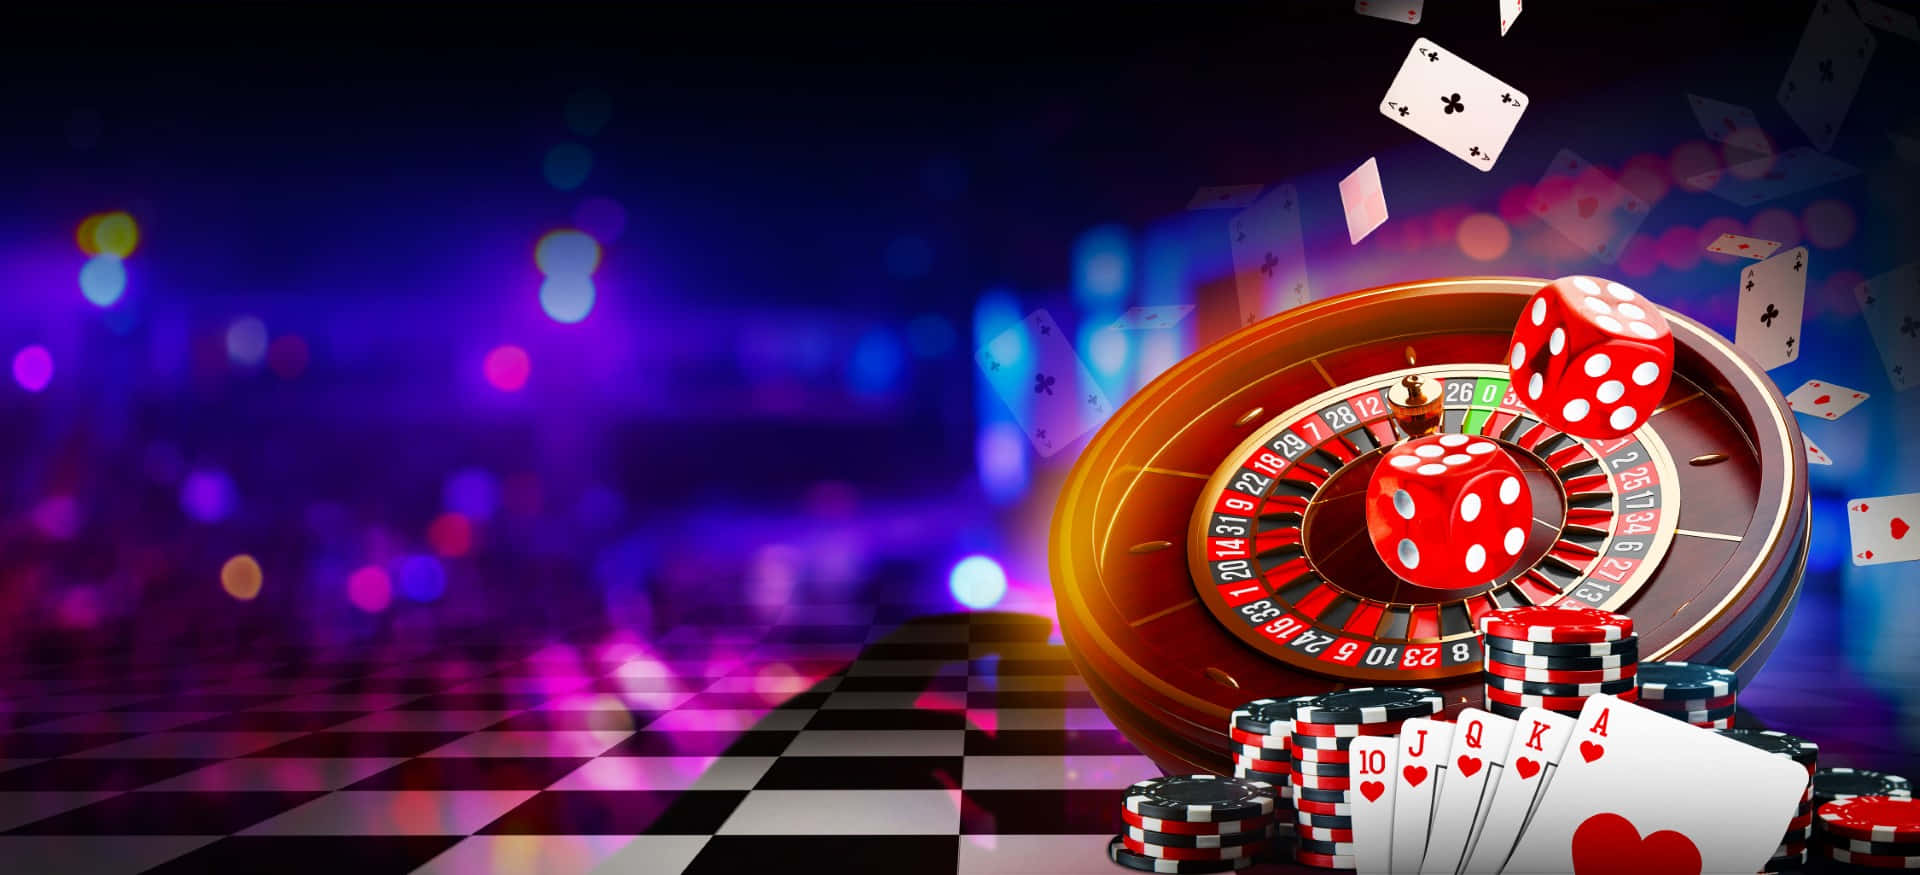 100+] Casino Background s for FREE | Wallpapers.com